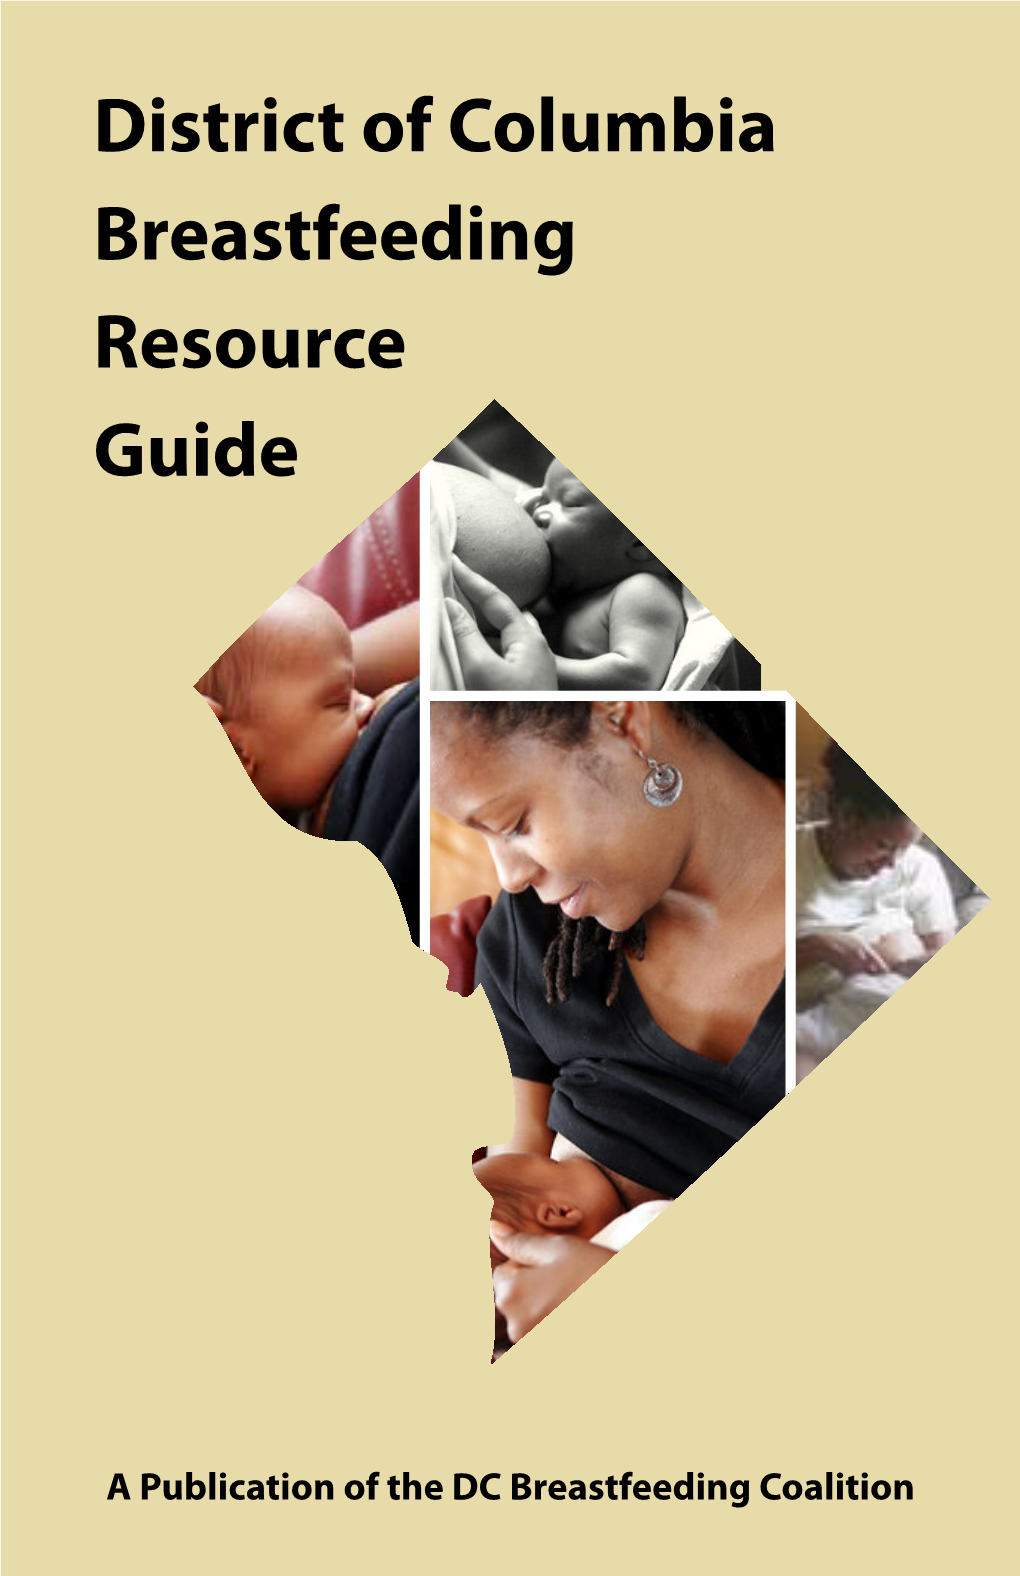 DC Breastfeeding Resource Guide Developed by the DC Breastfeeding Coalition, Inc